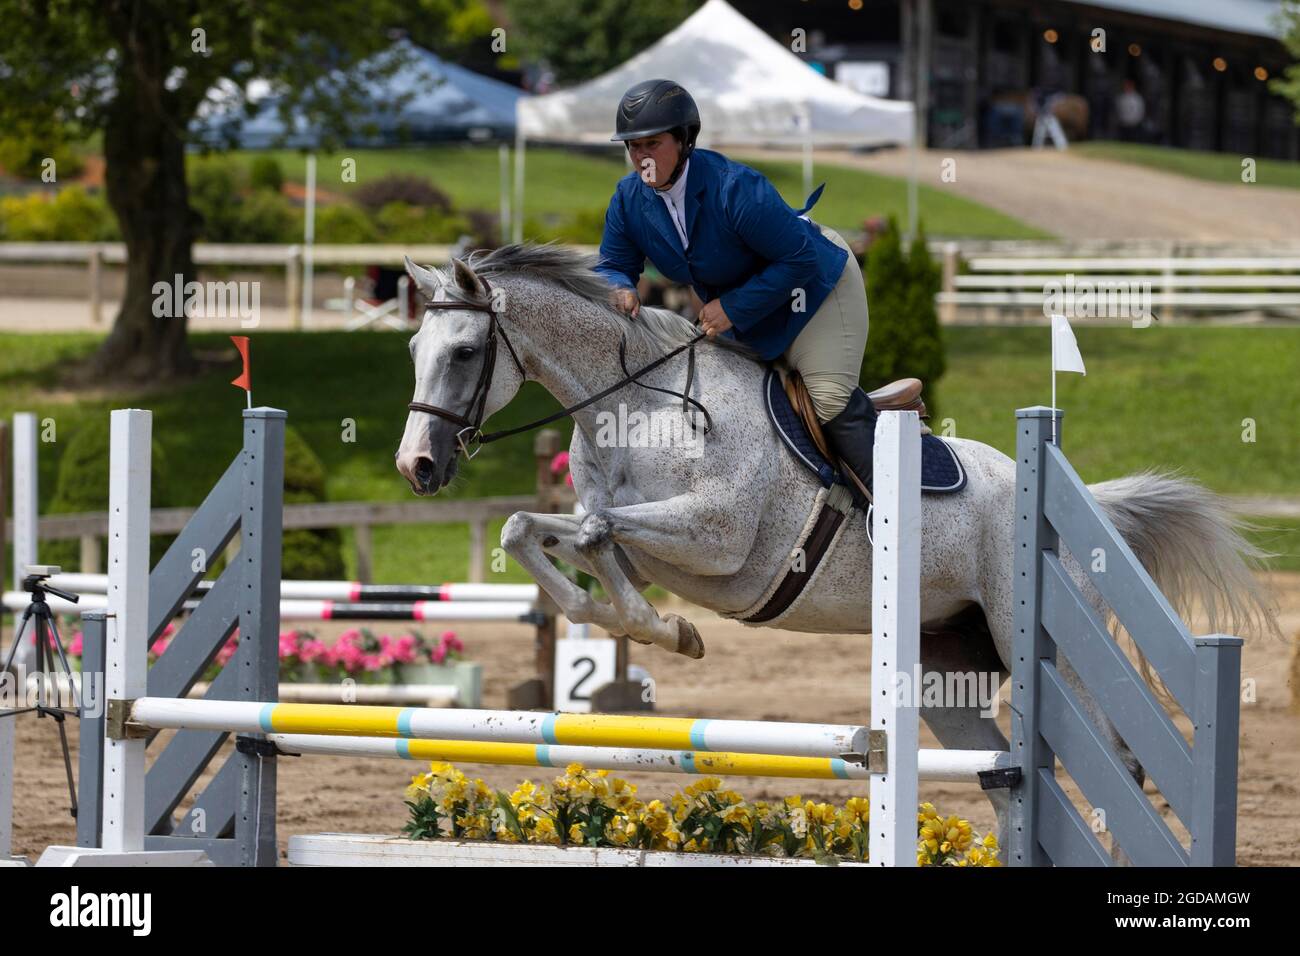 Horse and rider jumping a fence at a horse show. Stock Photo